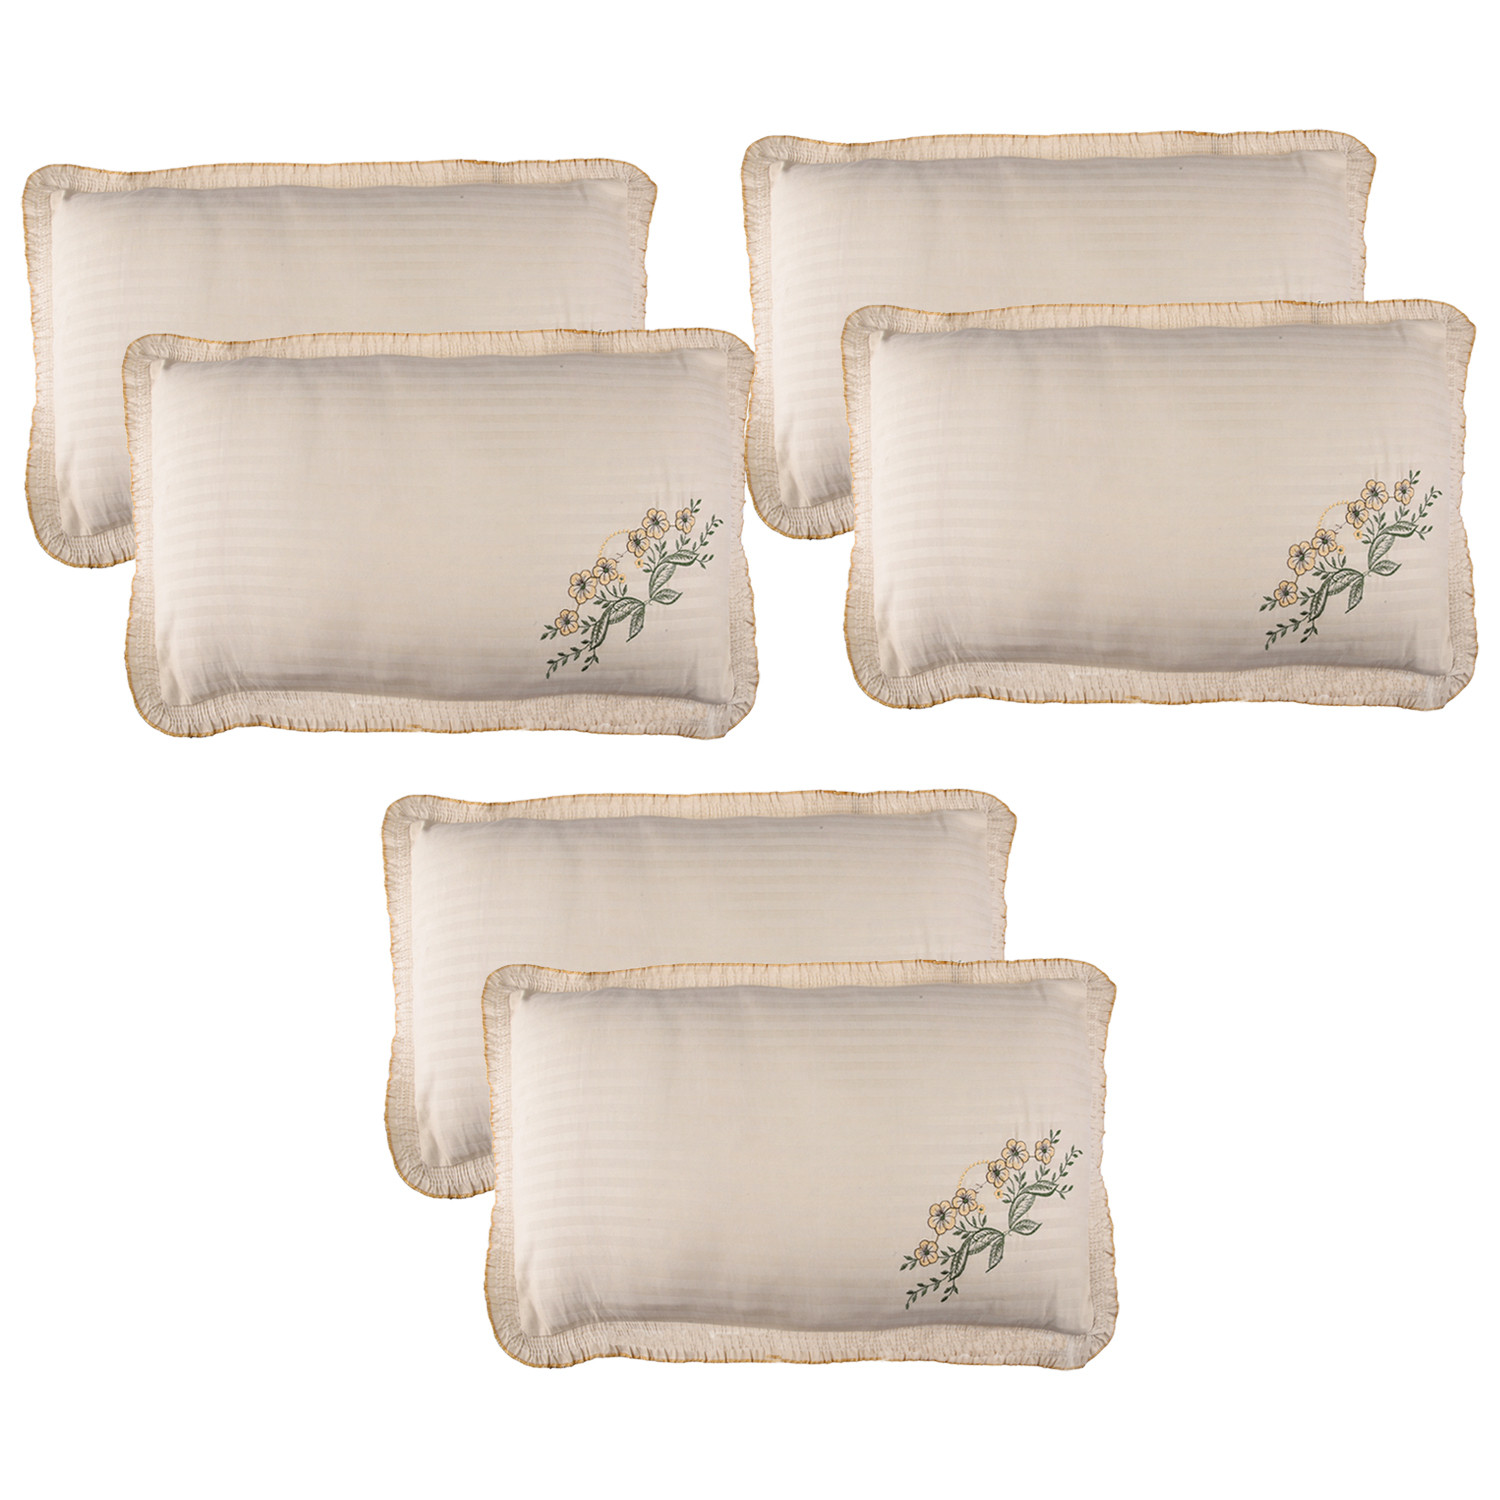 Kuber Industries Pillow Cover | Cotton Pillow Cover Set | Cushion Pillow Cover Set | Pillow Cover Set for Bedroom | Lining Embroidery Pillow Cover Set |Beige